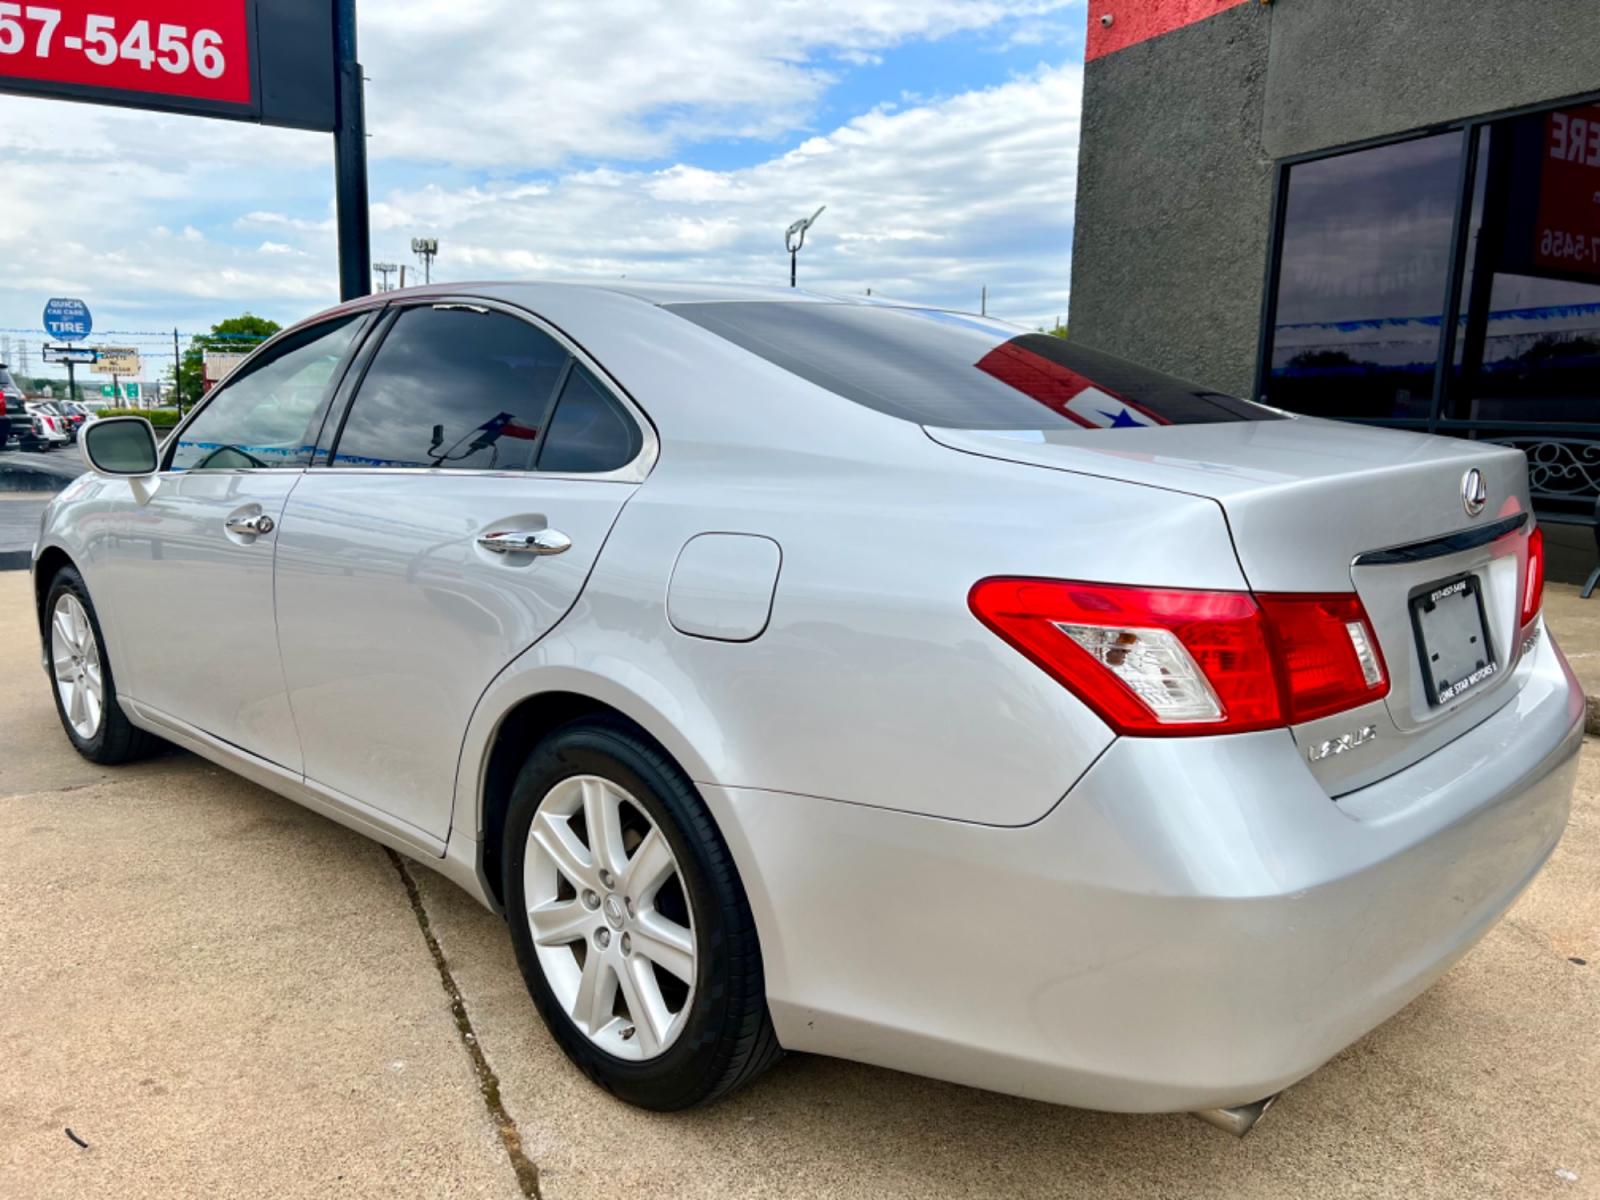 2007 SILVER LEXUS ES 350 BASE (JTHBJ46G072) , located at 5900 E. Lancaster Ave., Fort Worth, TX, 76112, (817) 457-5456, 0.000000, 0.000000 - CASH CAR ONLY, NO FINANCING AVAILABLE. THIS 2007 LEXUS ES 350 BASE 4 DOOR SEDAN RUNS AND DRIVES GREAT. IT IS EQUIPPED WITH A CD PLAYER, AM/FM RADIO AND AN AUX PORT. THE TIRES ARE IN GOOD CONDITION AND STILL HAVE TREAD LEFT ON THEM. THIS CAR WILL NOT LAST SO ACT FAST! Call or text Frances at 68 - Photo #4